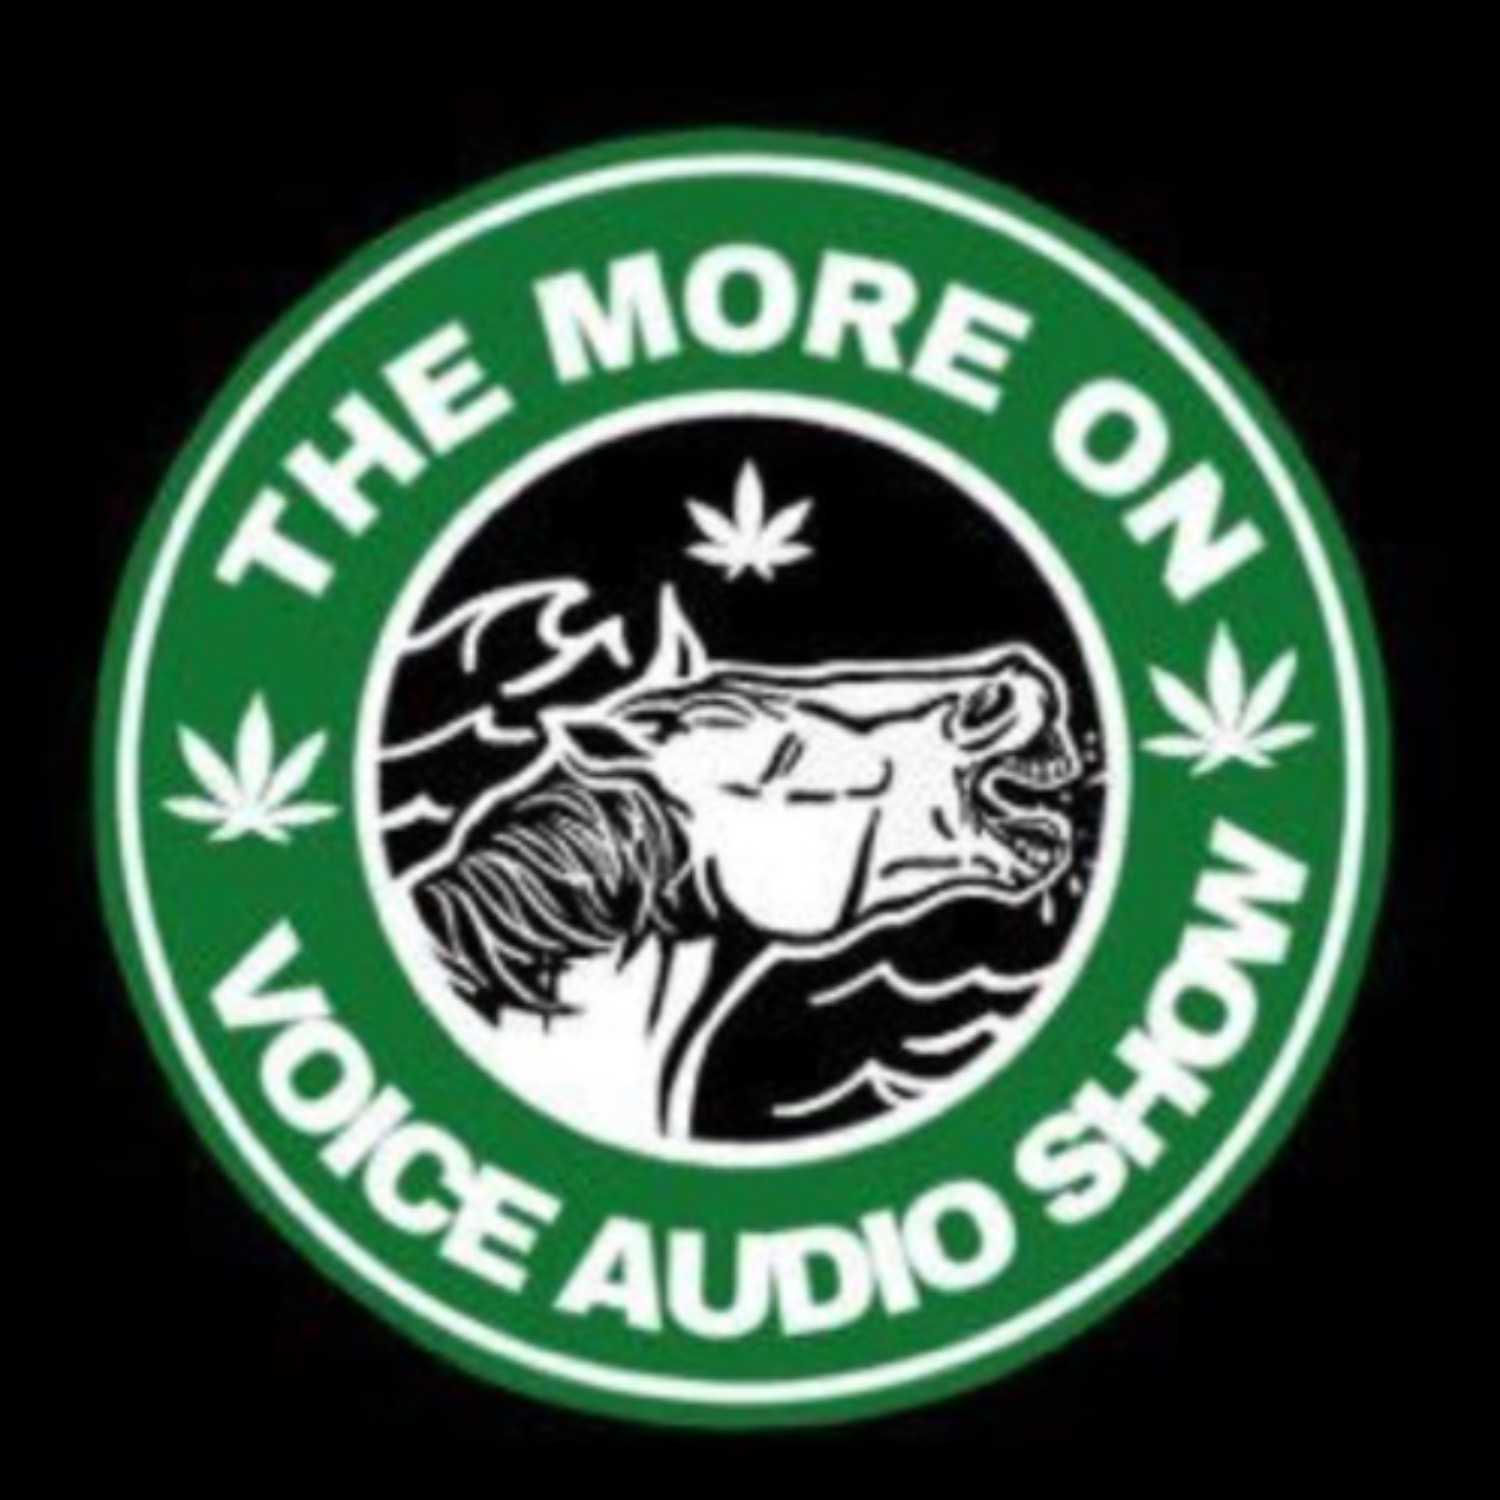 The More On Voice Audio Show: Episode 40